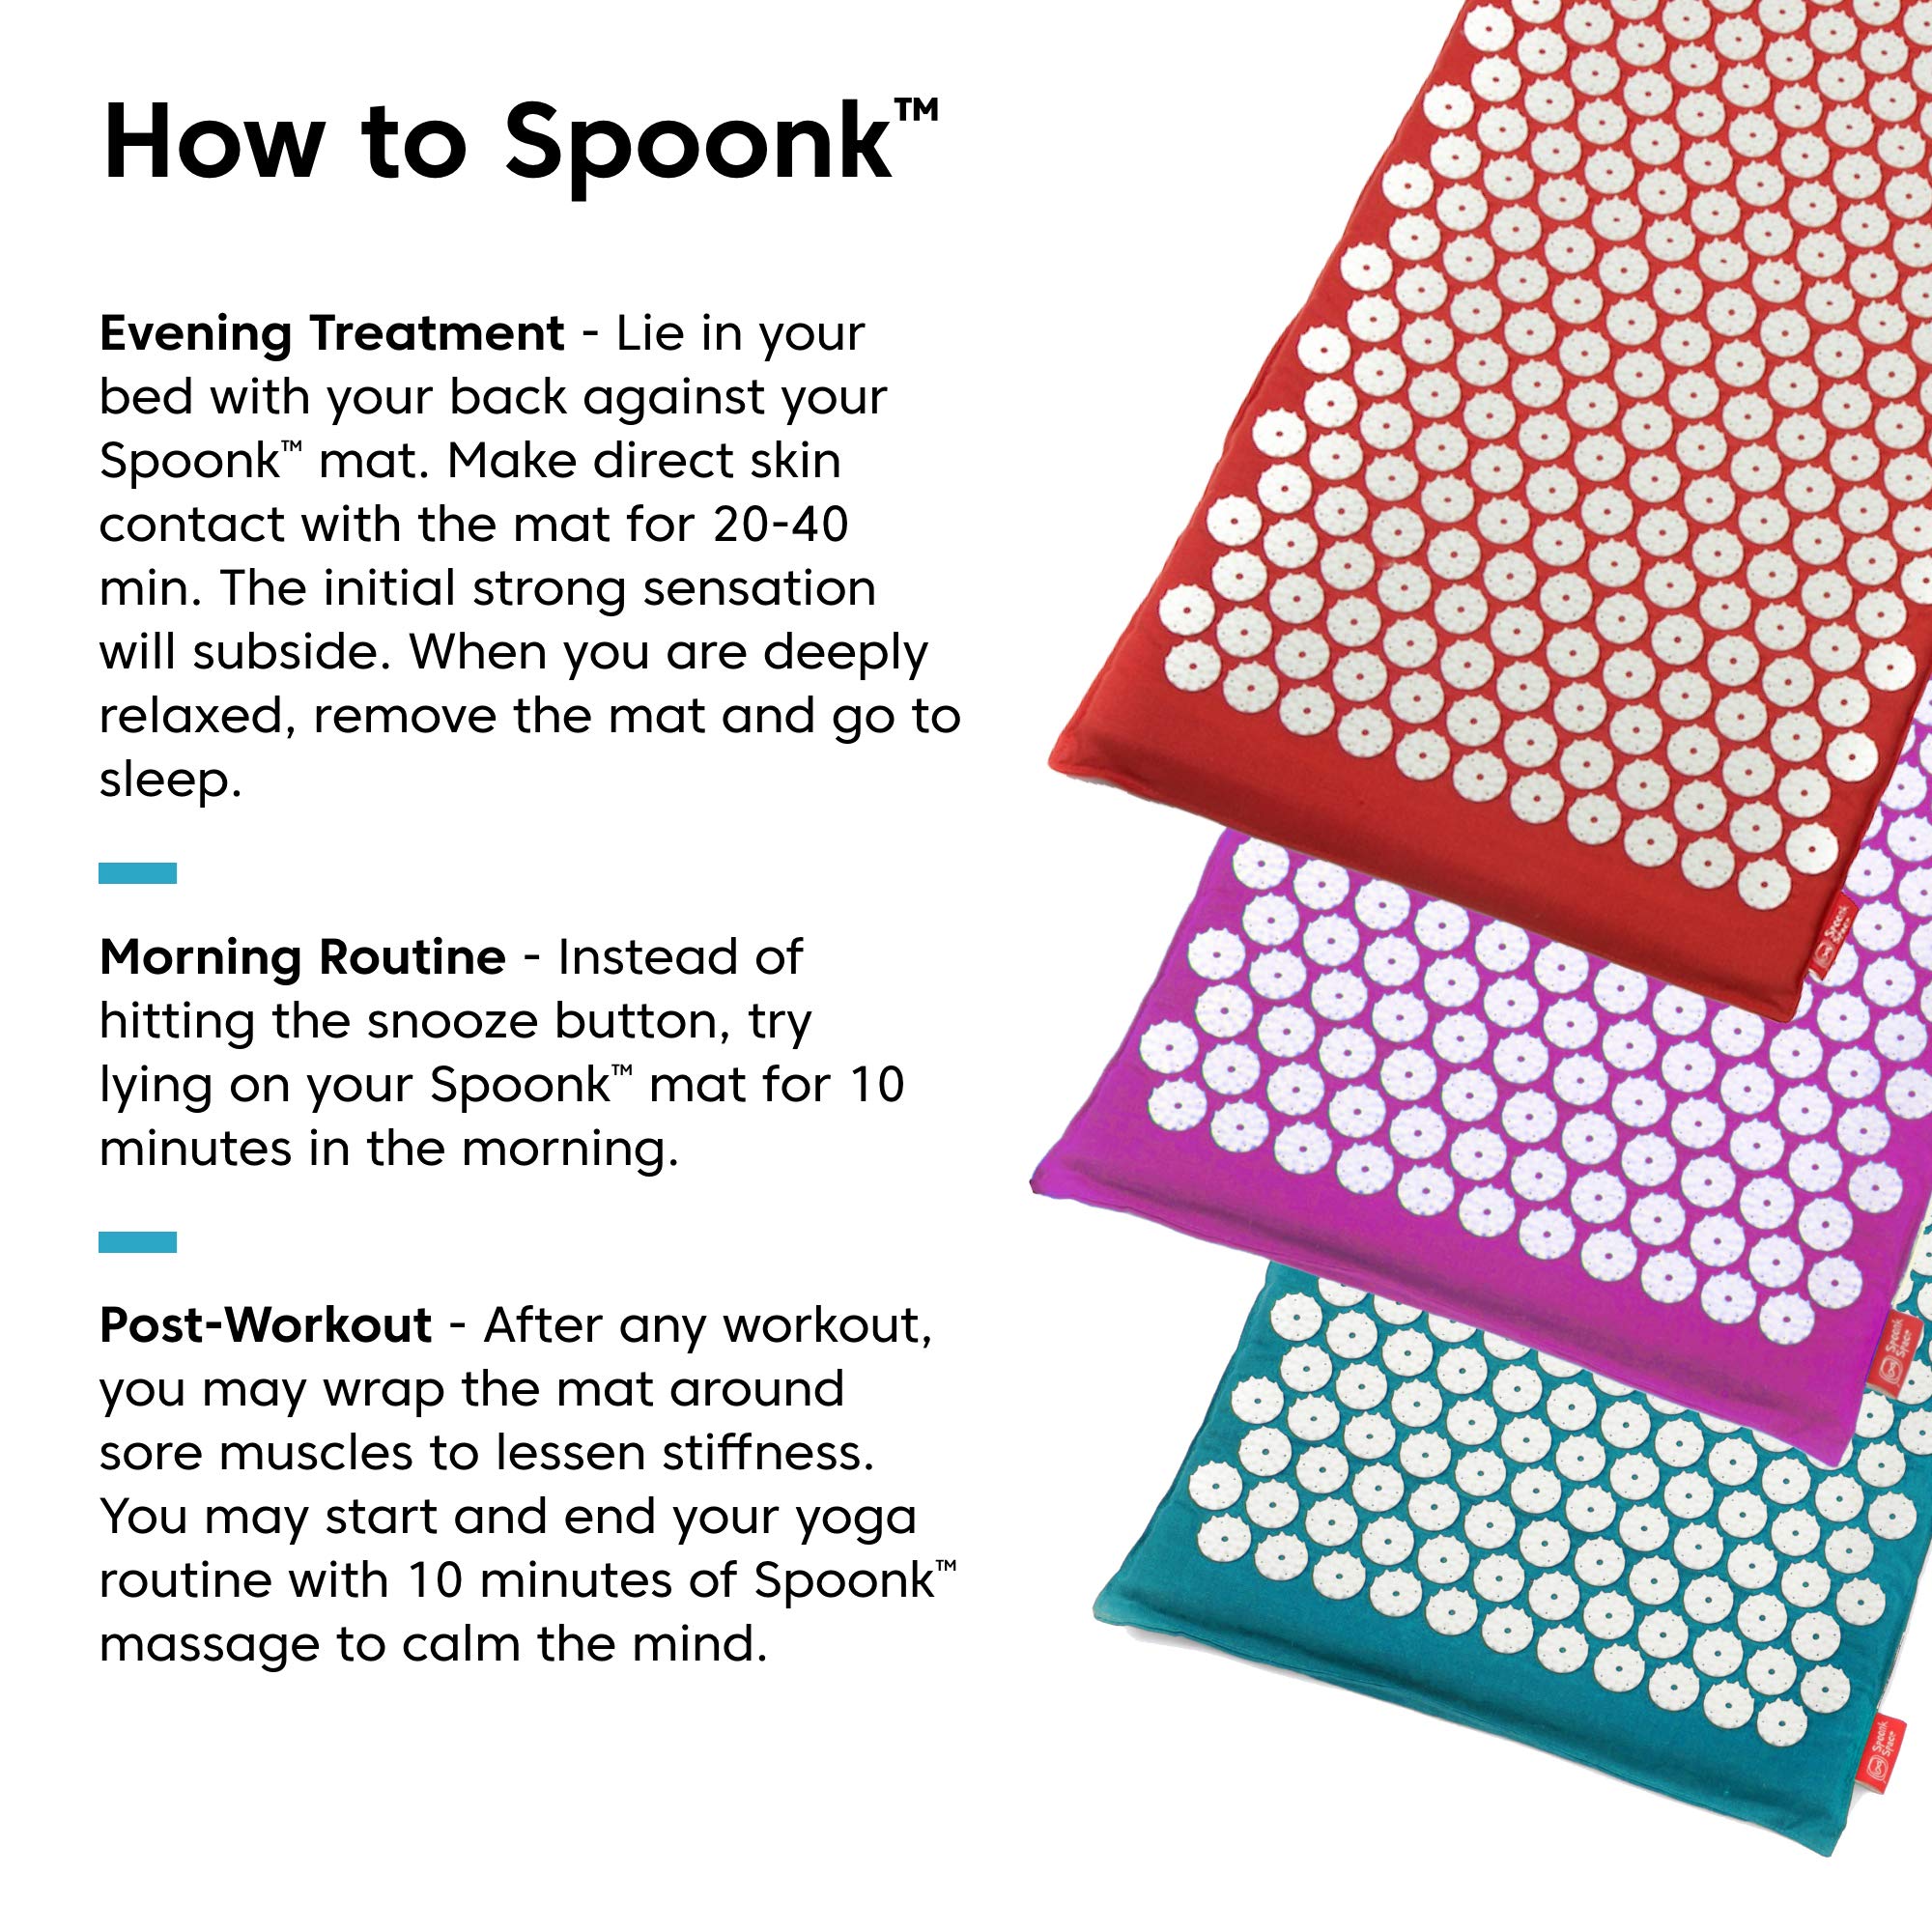 Spoonk Organic Hemp Acupressure Mat - Regular Size, Cherry Red - Stimulates Circulation, Relieves Muscle Tension & Pain, Reduces Stress, Promotes Deep Sleep - Made with Sustainable Materials